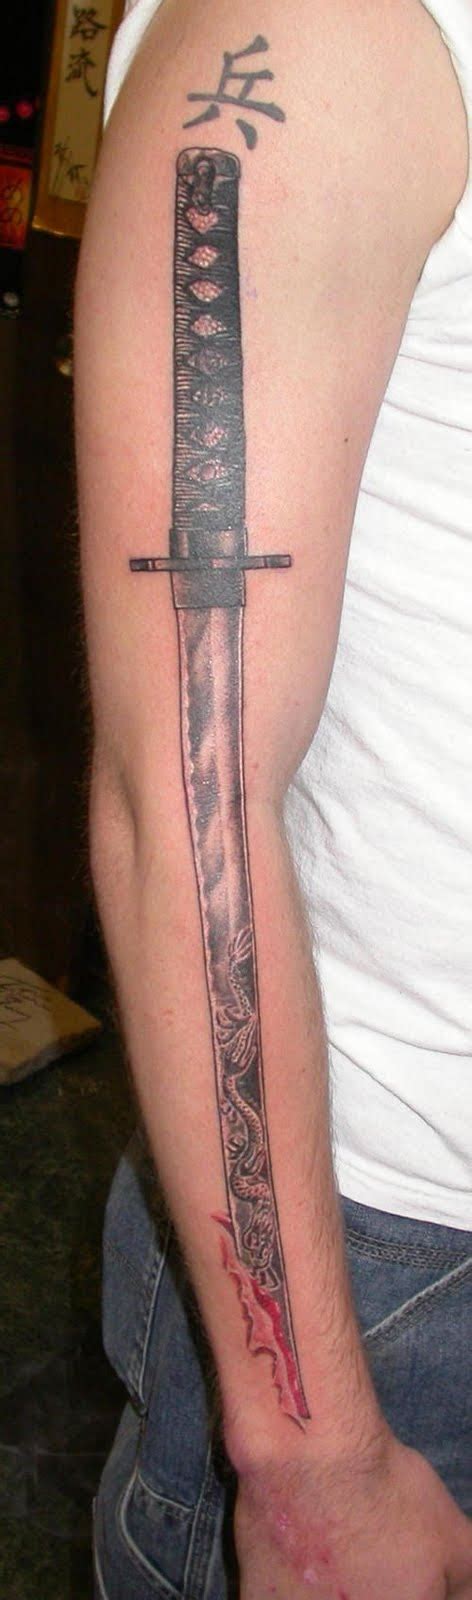 Katana Tattoo Because There Are Not Many Examples To Choose From But You Get The Idea Right